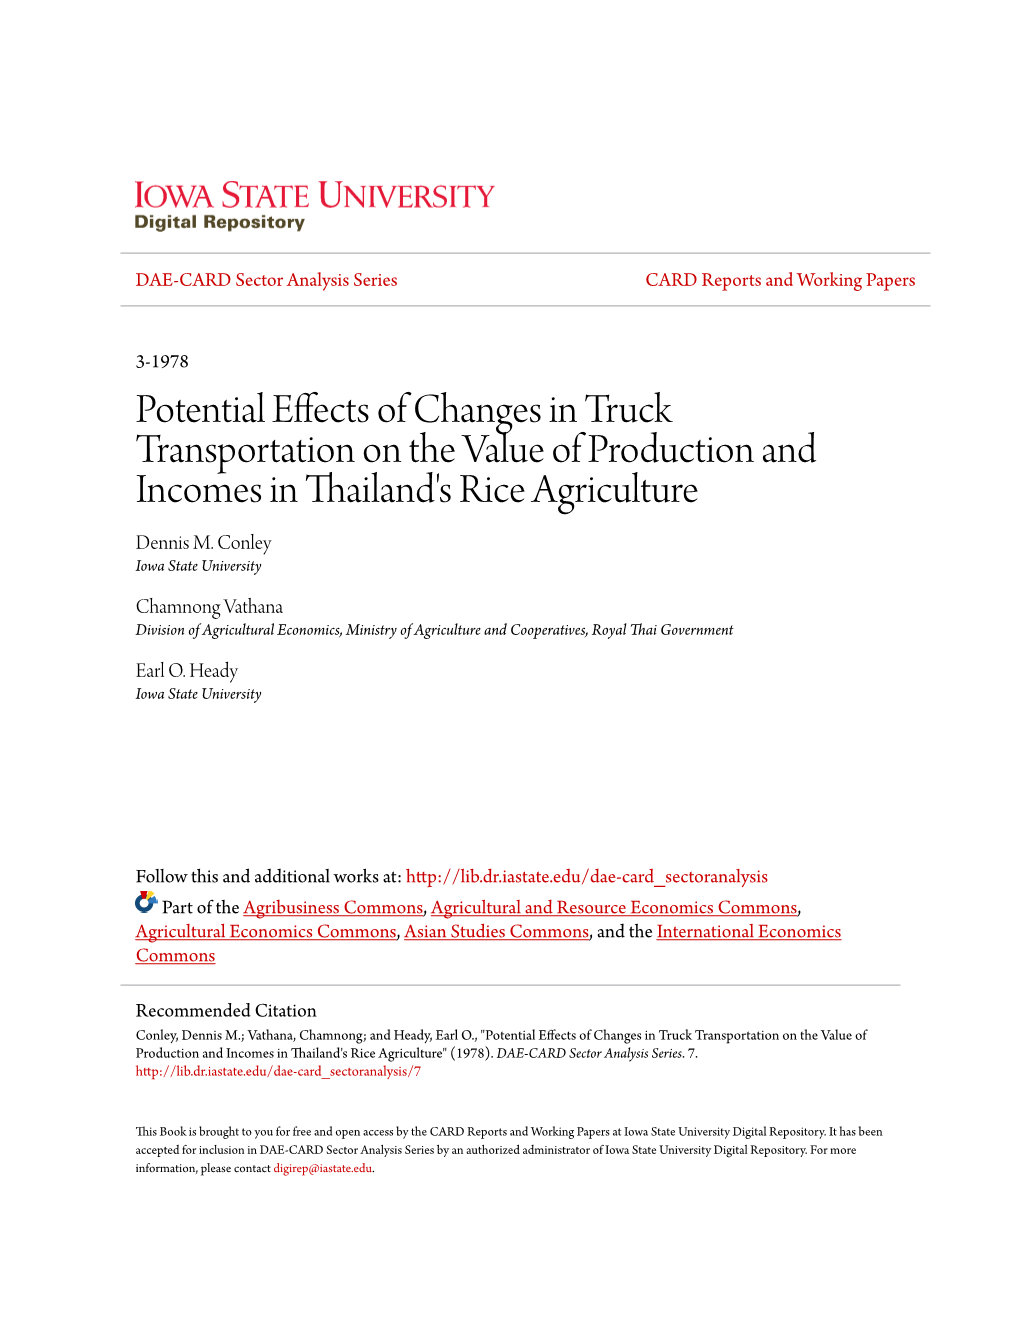 Potential Effects of Changes in Truck Transportation on the Value of Production and Incomes in Thailand's Rice Agriculture Dennis M